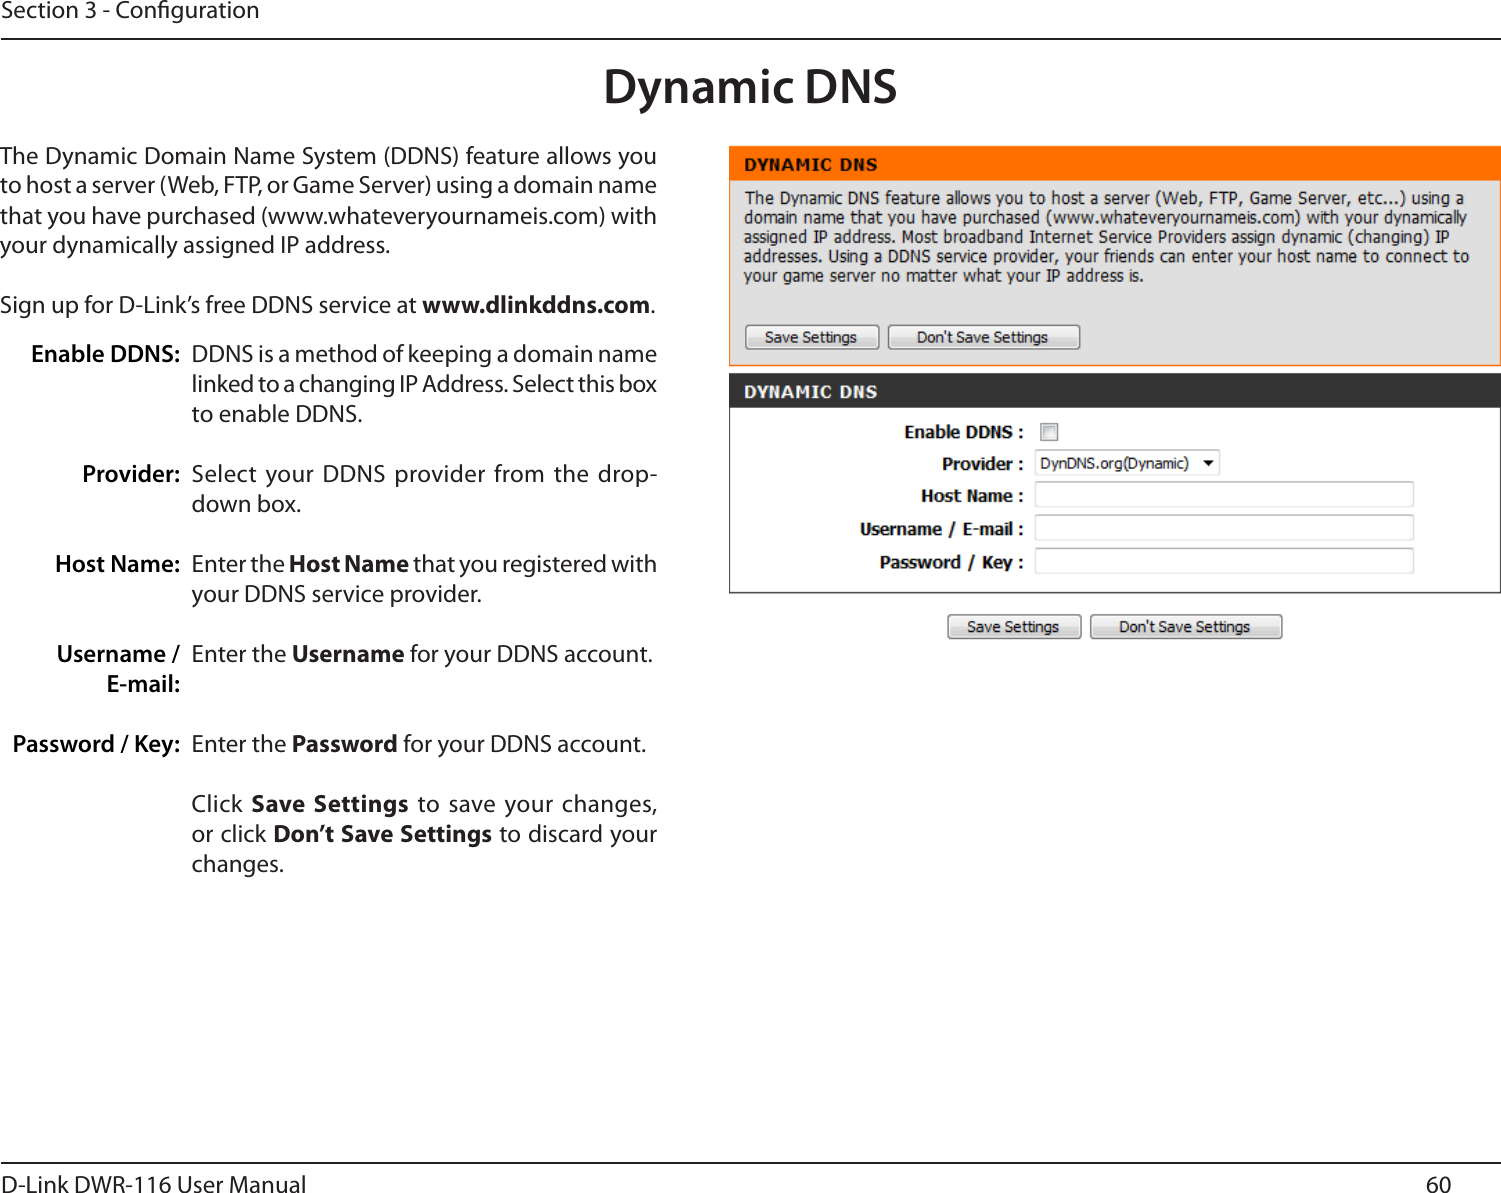 60D-Link DWR-116 User ManualSection 3 - CongurationDynamic DNSDDNS is a method of keeping a domain name linked to a changing IP Address. Select this box to enable DDNS.Select  your DDNS provider from the  drop-down box.Enter the Host Name that you registered with your DDNS service provider.Enter the Username for your DDNS account.Enter the Password for your DDNS account.Click Save  Settings to save your changes, or click Don’t Save Settings to discard your changes.The Dynamic Domain Name System (DDNS) feature allows you to host a server (Web, FTP, or Game Server) using a domain name that you have purchased (www.whateveryournameis.com) with your dynamically assigned IP address.Sign up for D-Link’s free DDNS service at www.dlinkddns.com.Enable DDNS:Provider: Host Name:Username / E-mail: Password / Key: